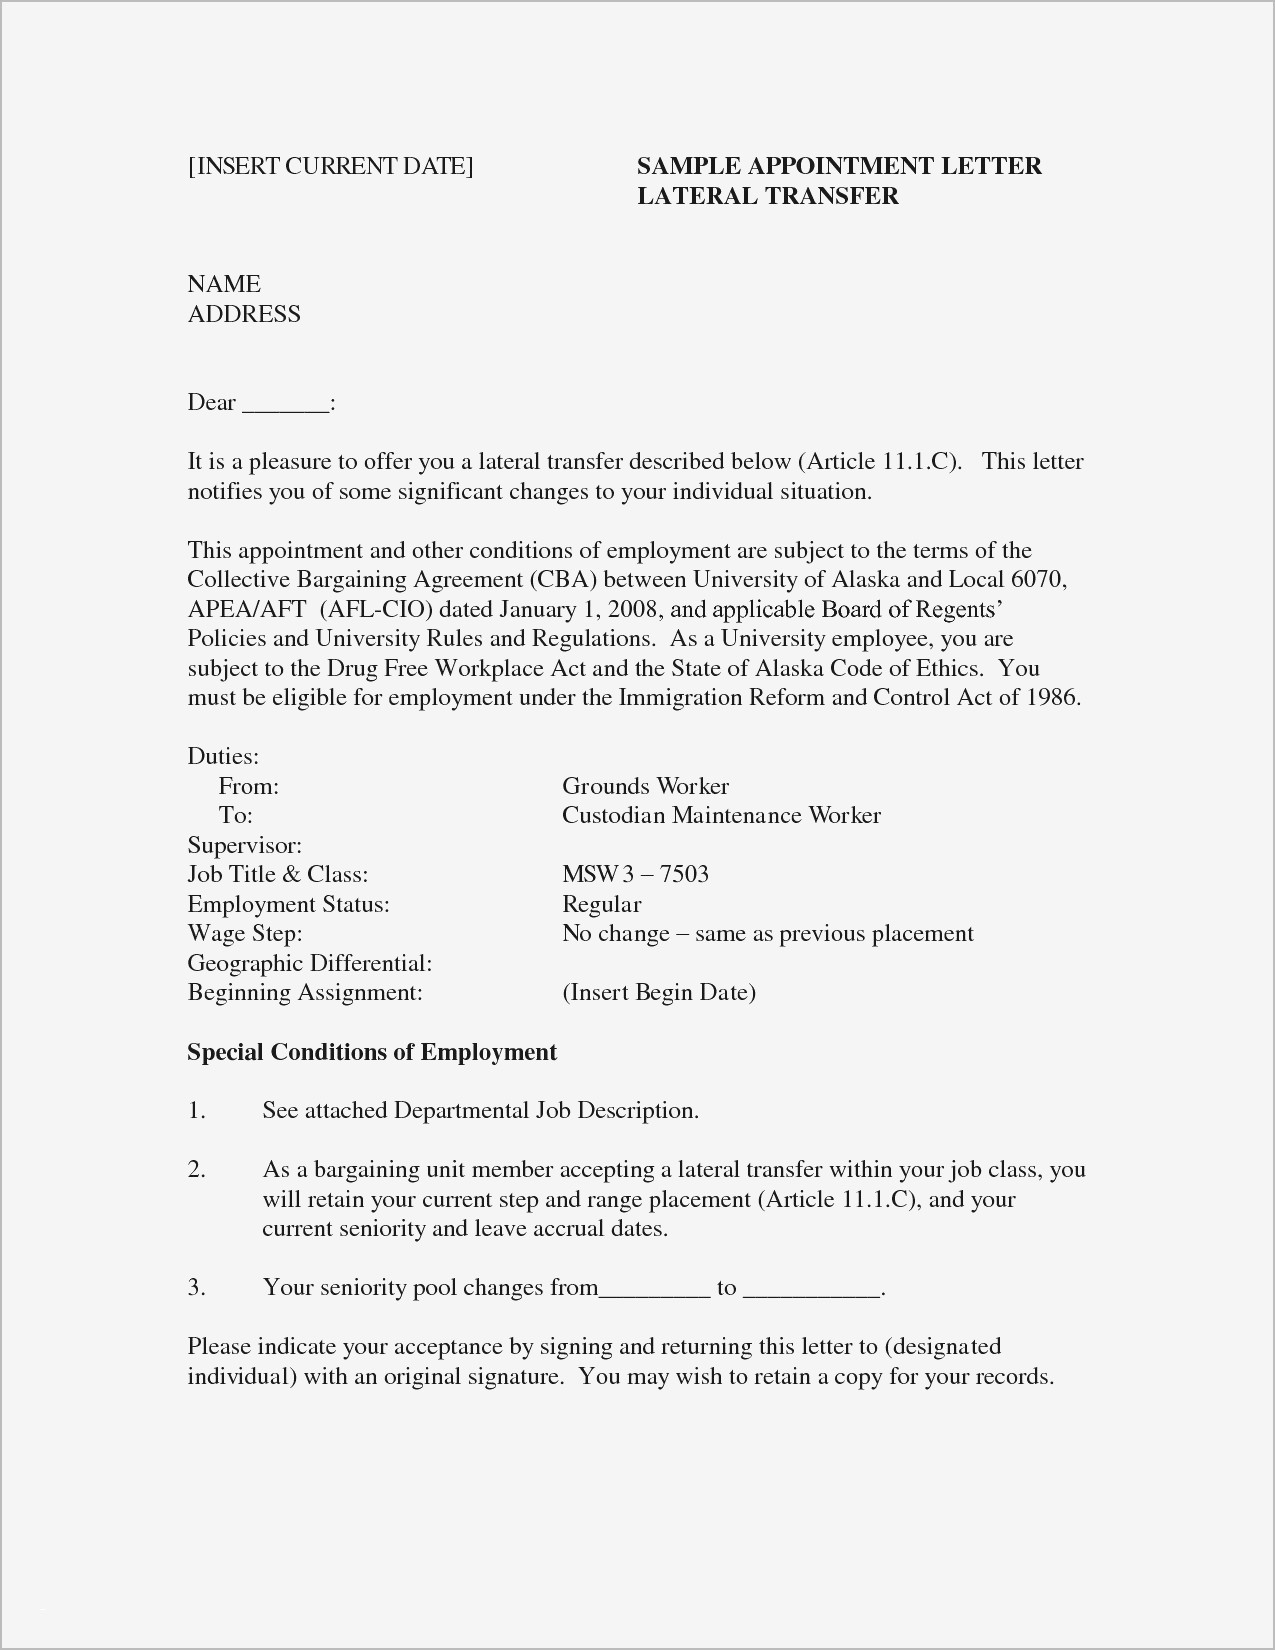 How To Do A Resume How To Word A Resume Lovely How Do You Write A Resume For A Job Of How To Word A Resume how to do a resume|wikiresume.com